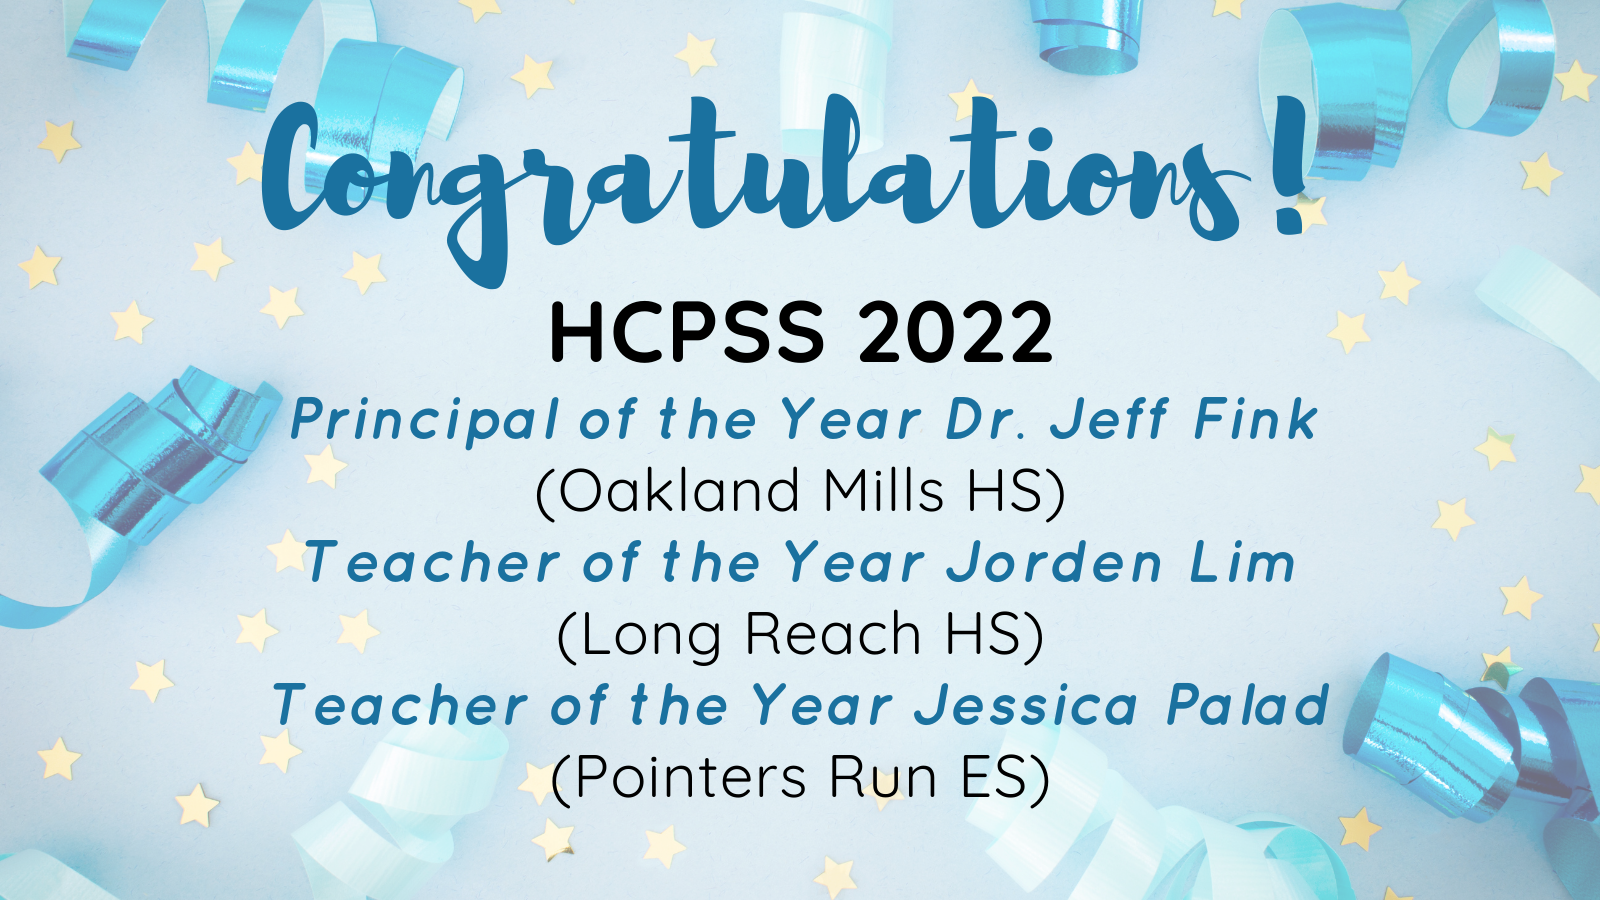 blue background with ribbons and confetti. Text overlay stating, Congratulations! HCPSS 2022 Principal of the Year Dr. Jeff Fink (Oakland Mills HS) Teacher of the Year Jorden Lim (Long Reach HS) Teacher of the Year Jessica Palad (Pointers Run ES)